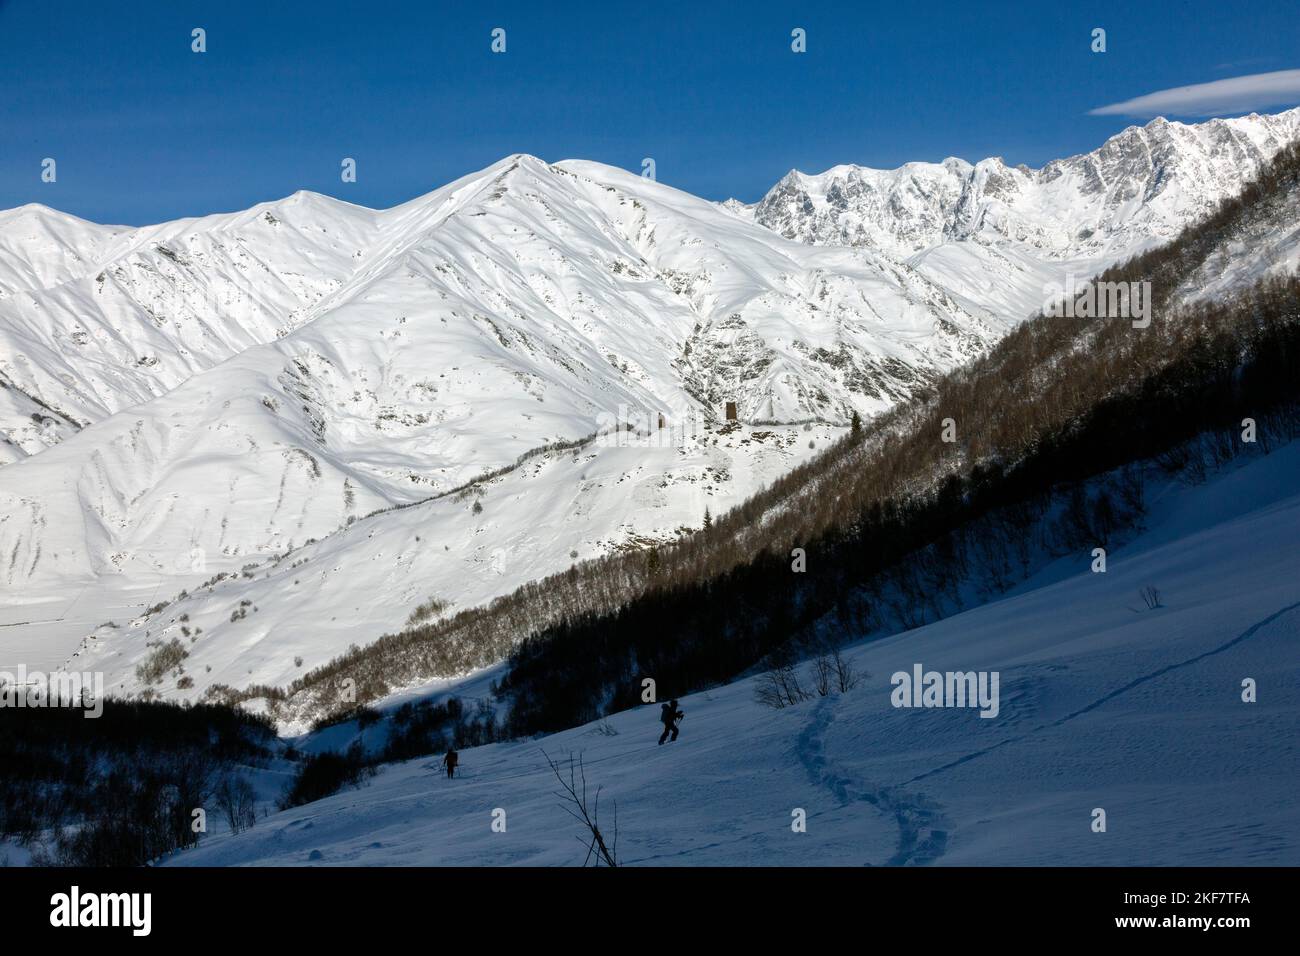 A team of freerider skiers climbs against the background of snowy ridges of the Caucasus Mountains, Svaneti, Georgia, backcountry Stock Photo